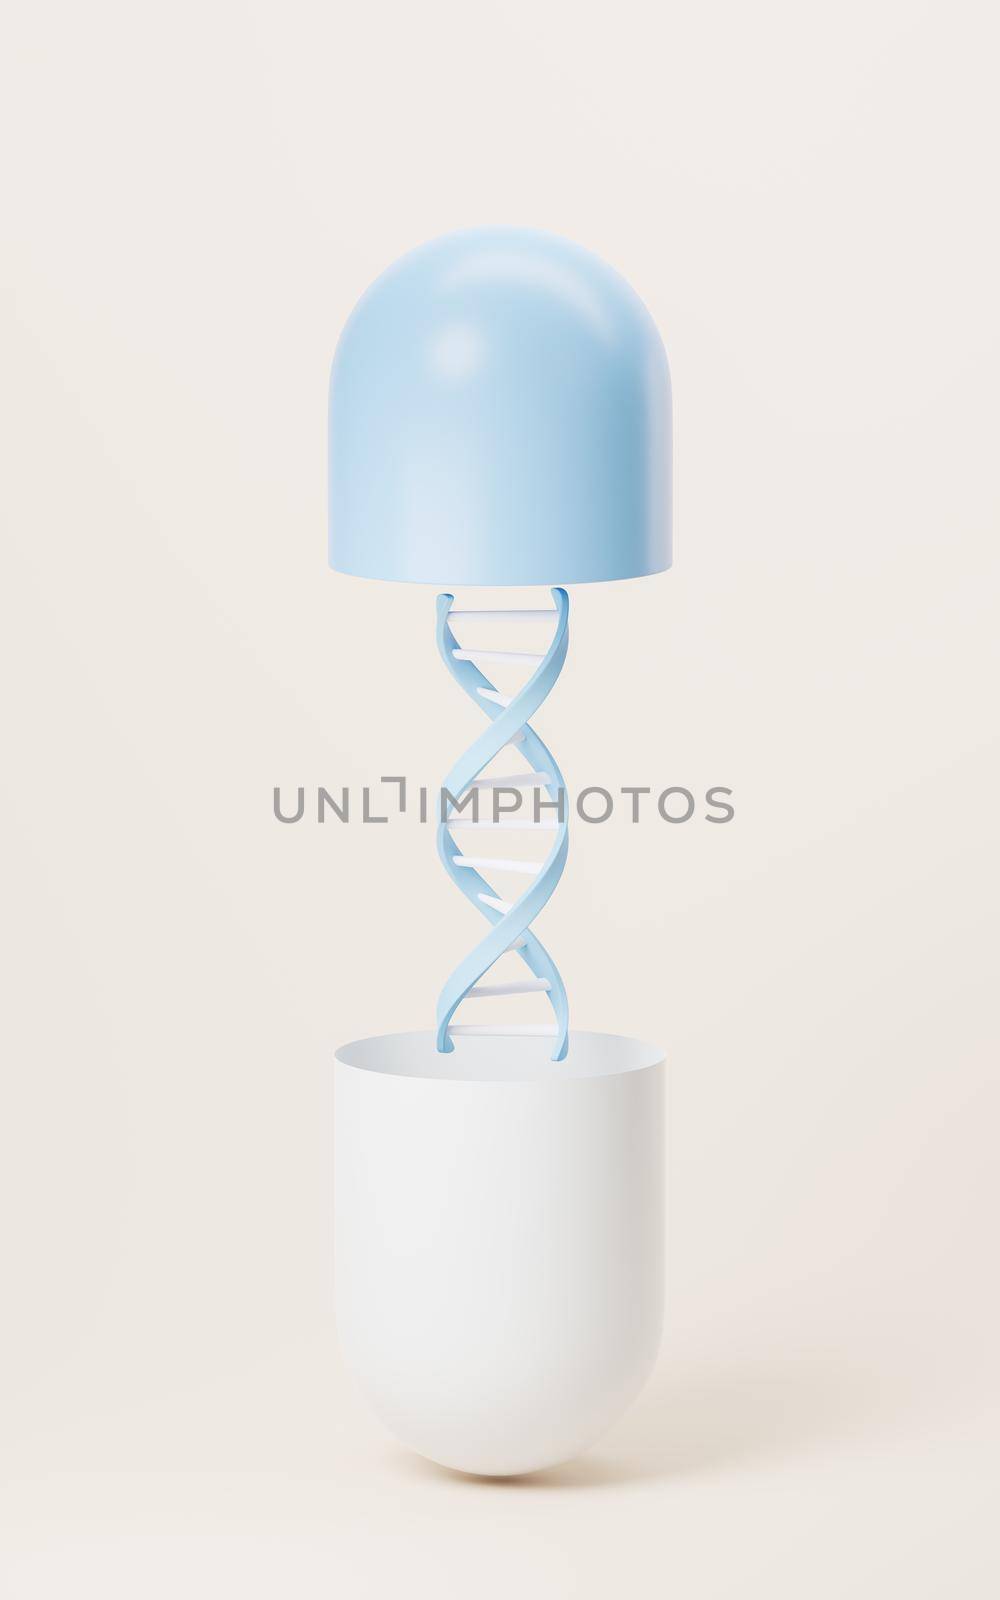 DNA and pharmaceutical concept, 3d rendering. by vinkfan